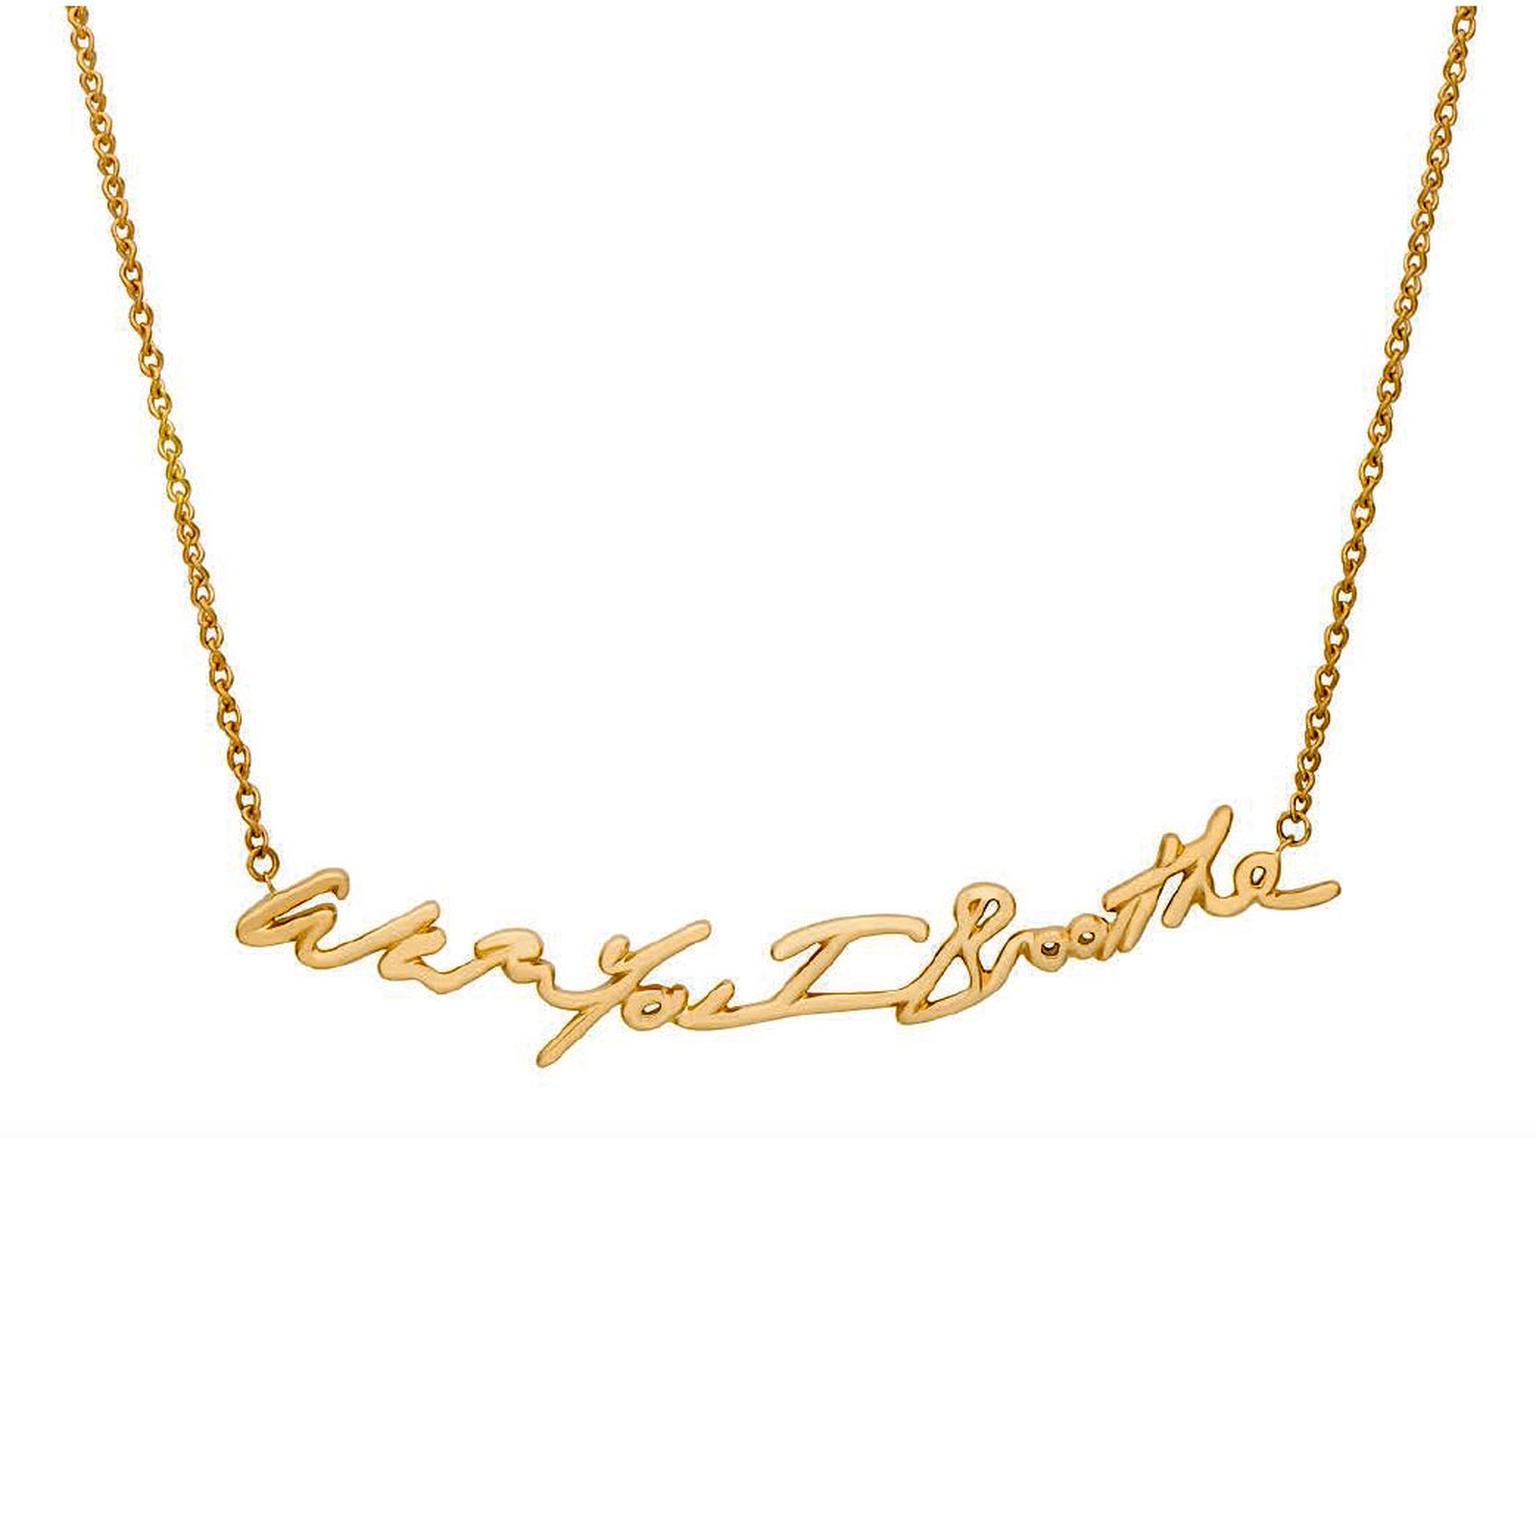 Tracey Emin With You I Breathe necklace